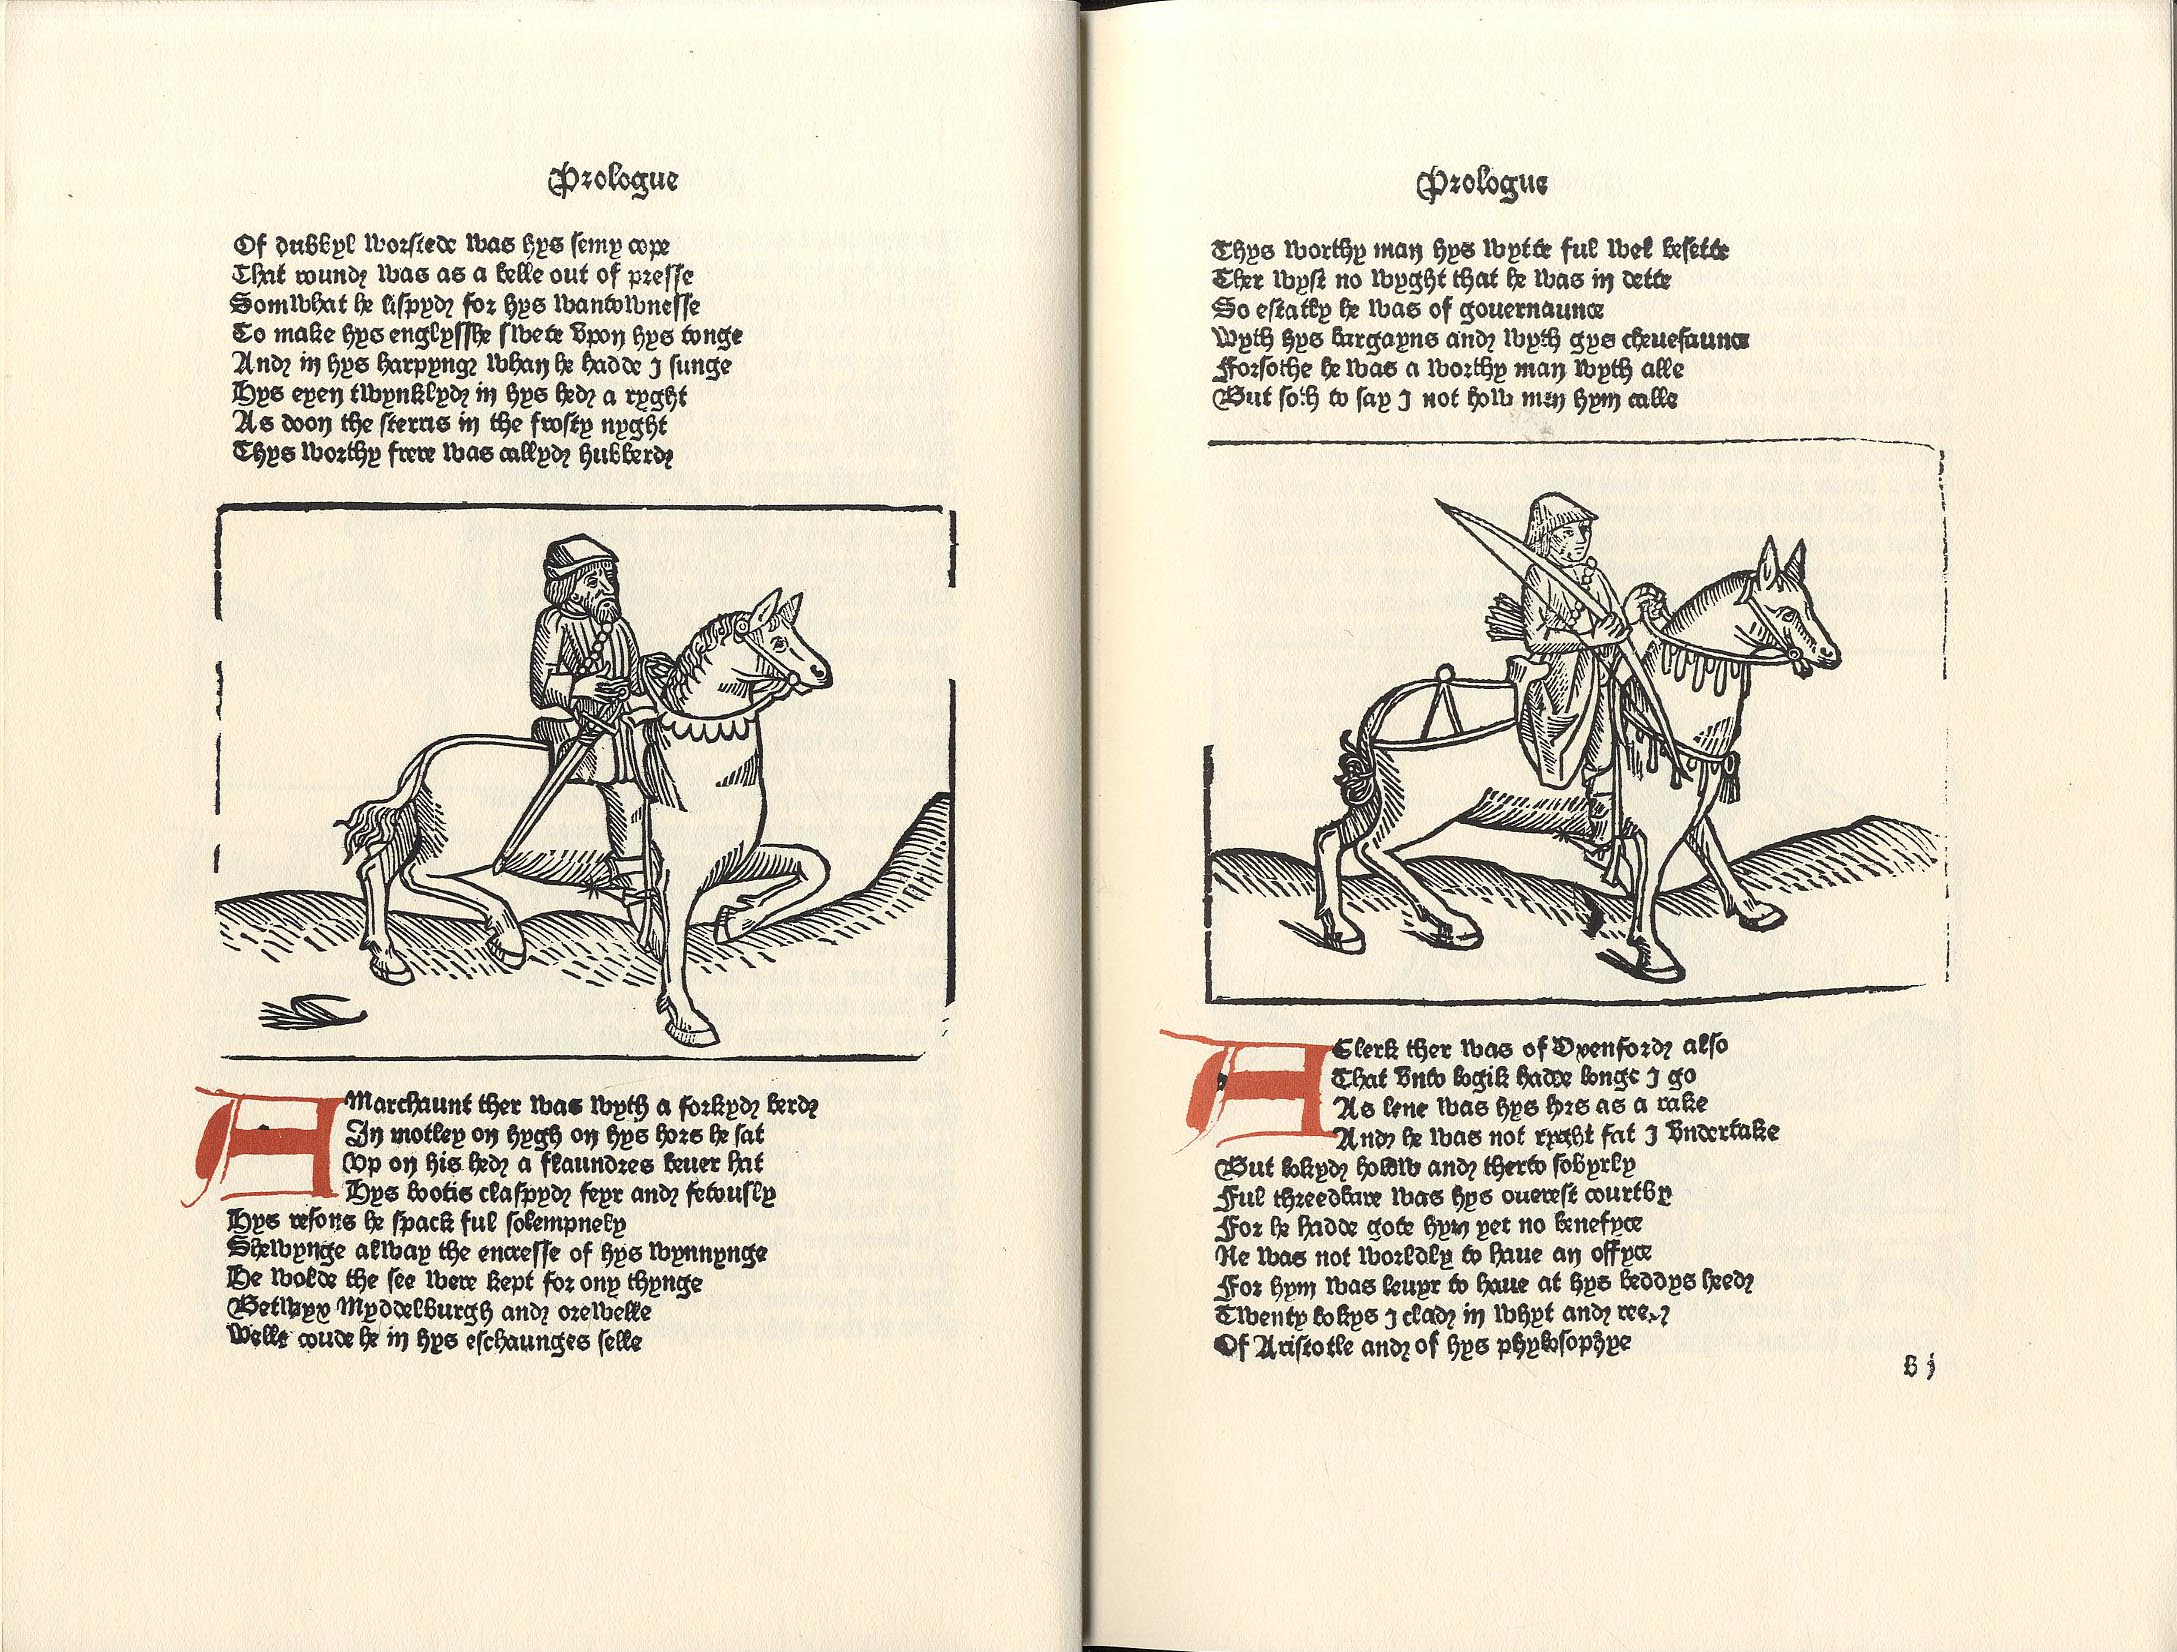 Woodcut from Caxton